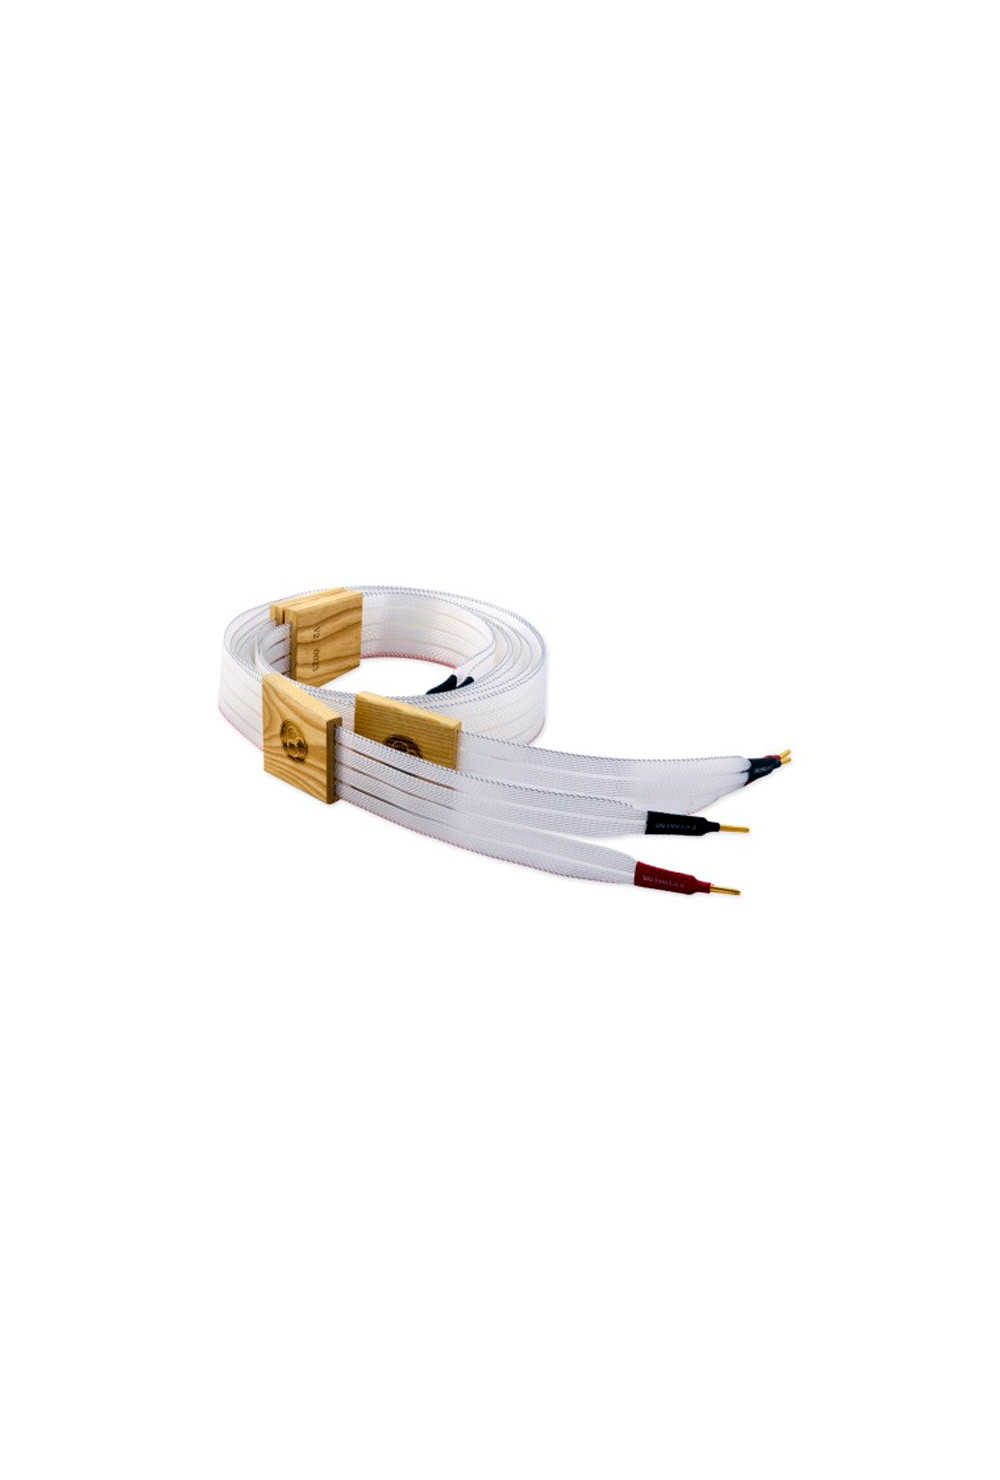 Nordost Valhalla-2  2x2.5m is terminated with low-mass Z plugs